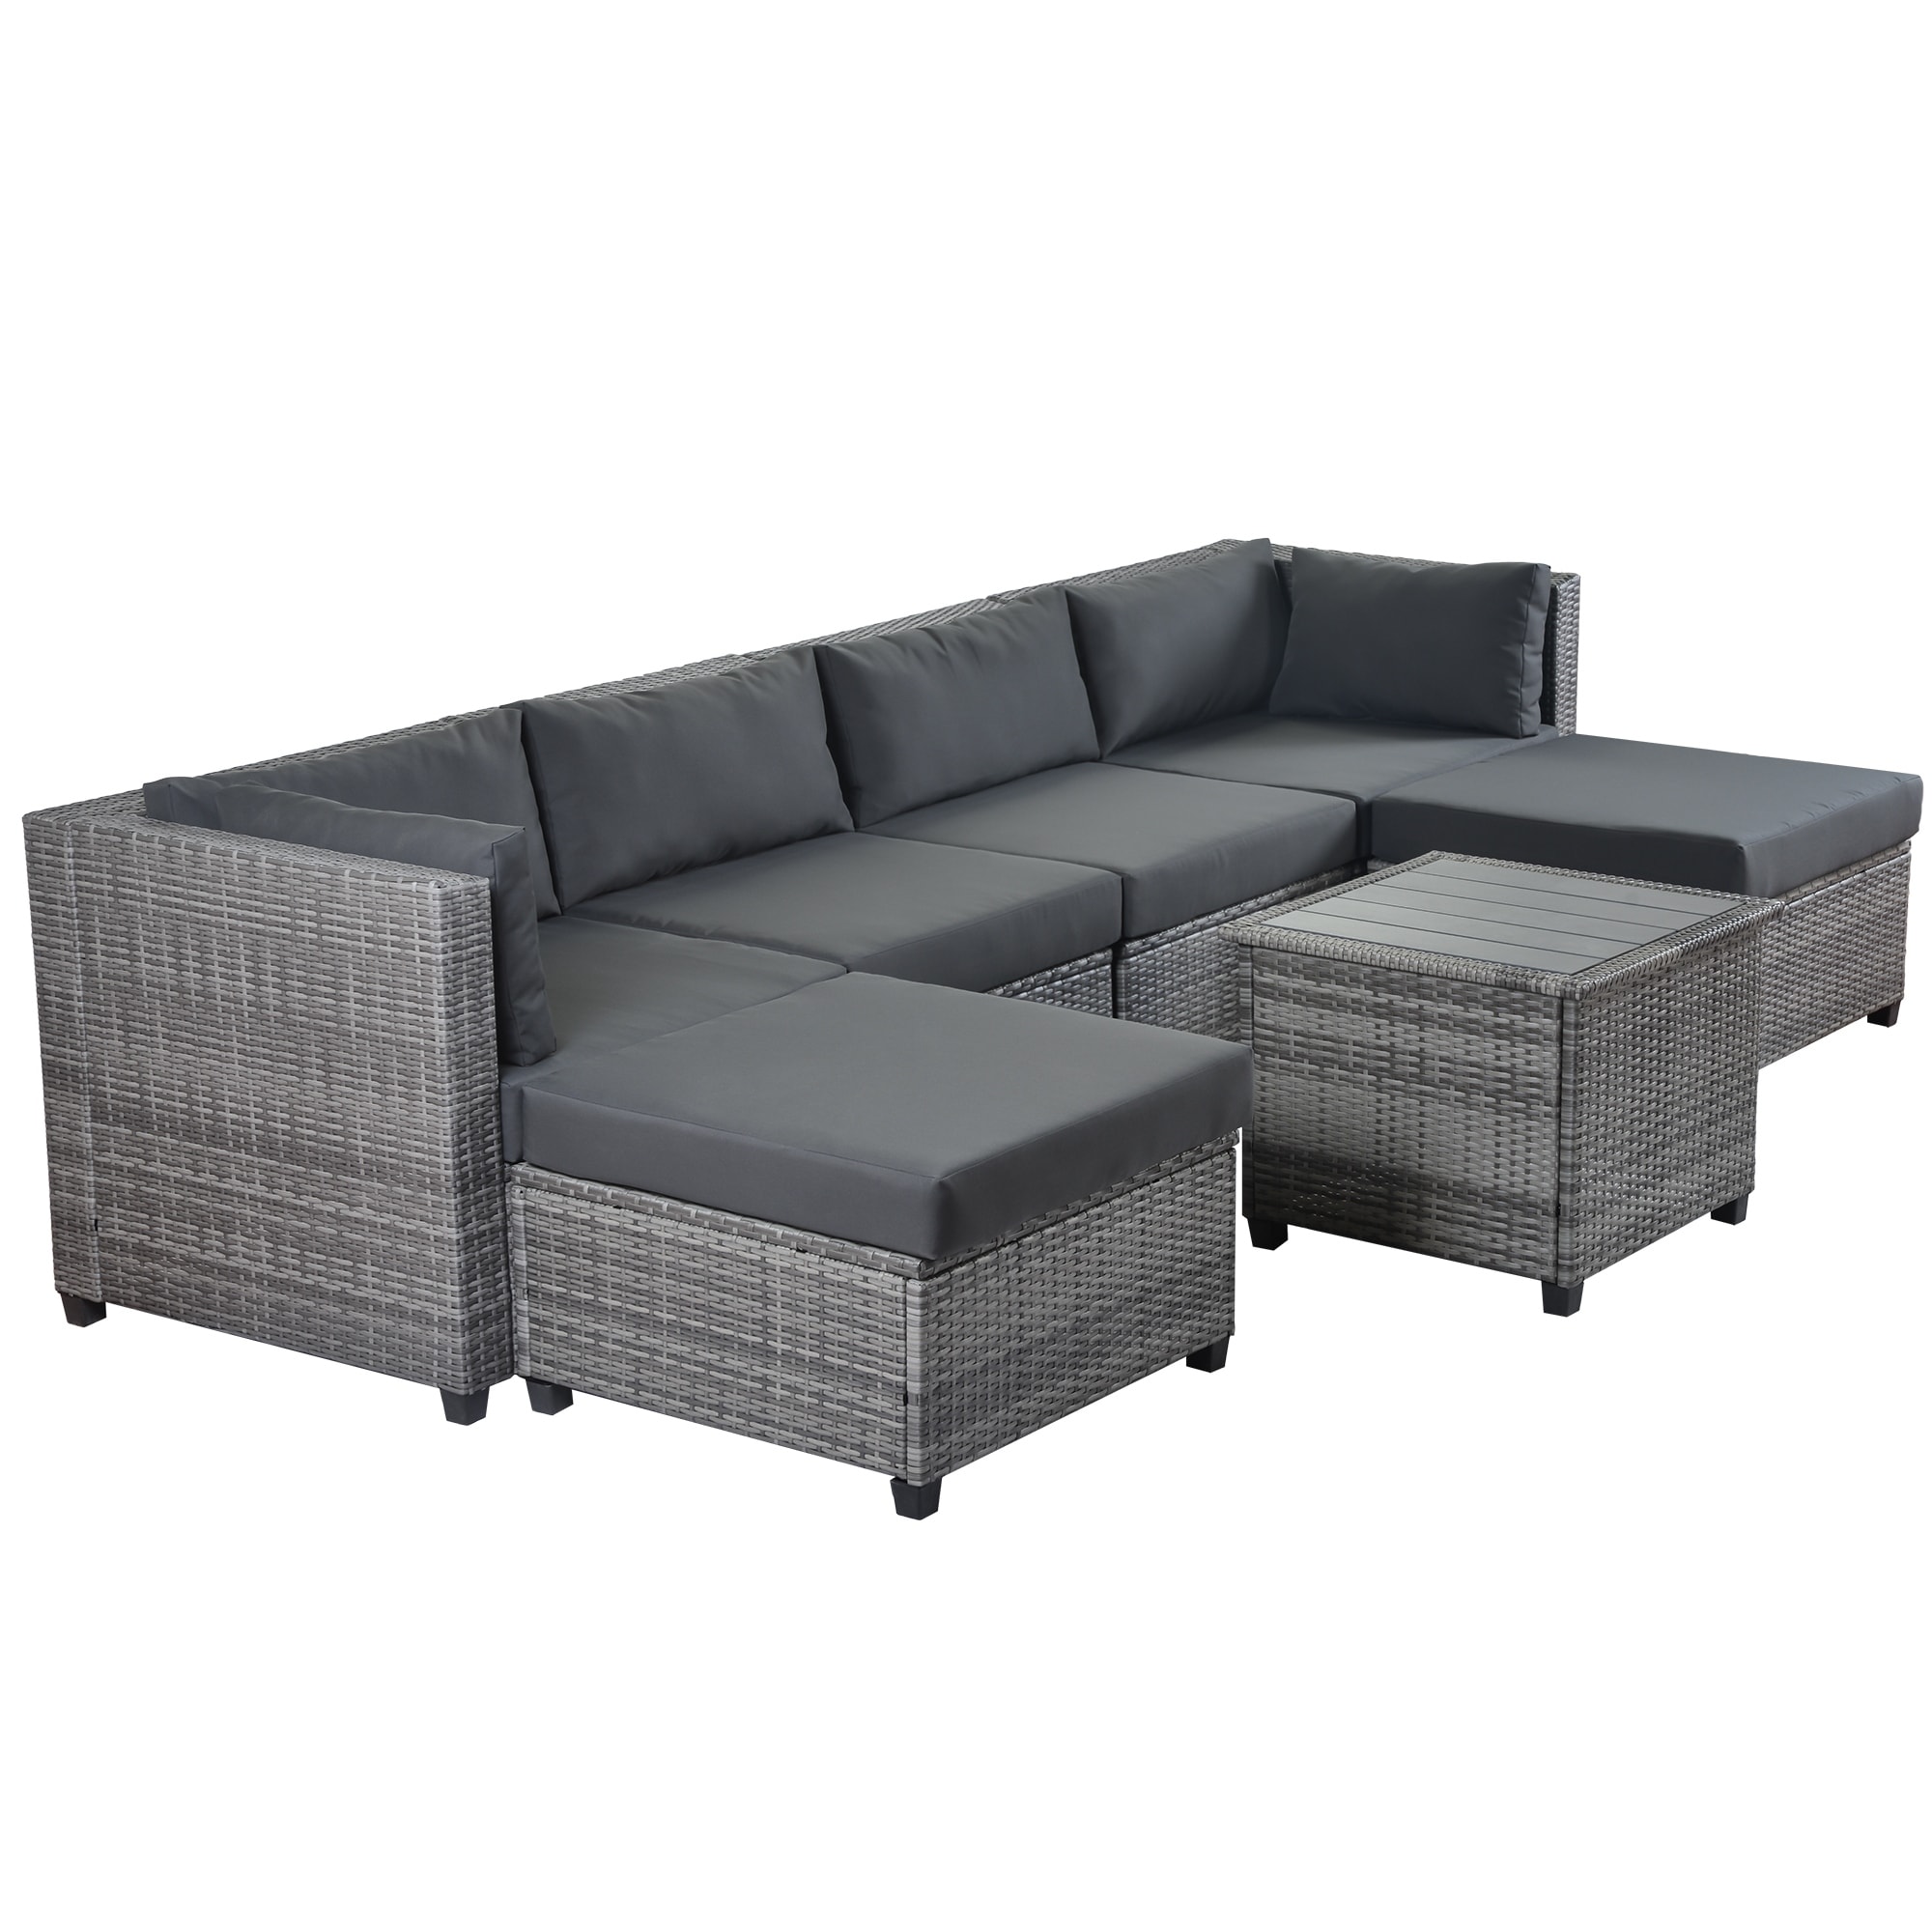 7 Piece Rattan Sectional Seating Group With Cushions  Outdoor Ratten Sofa